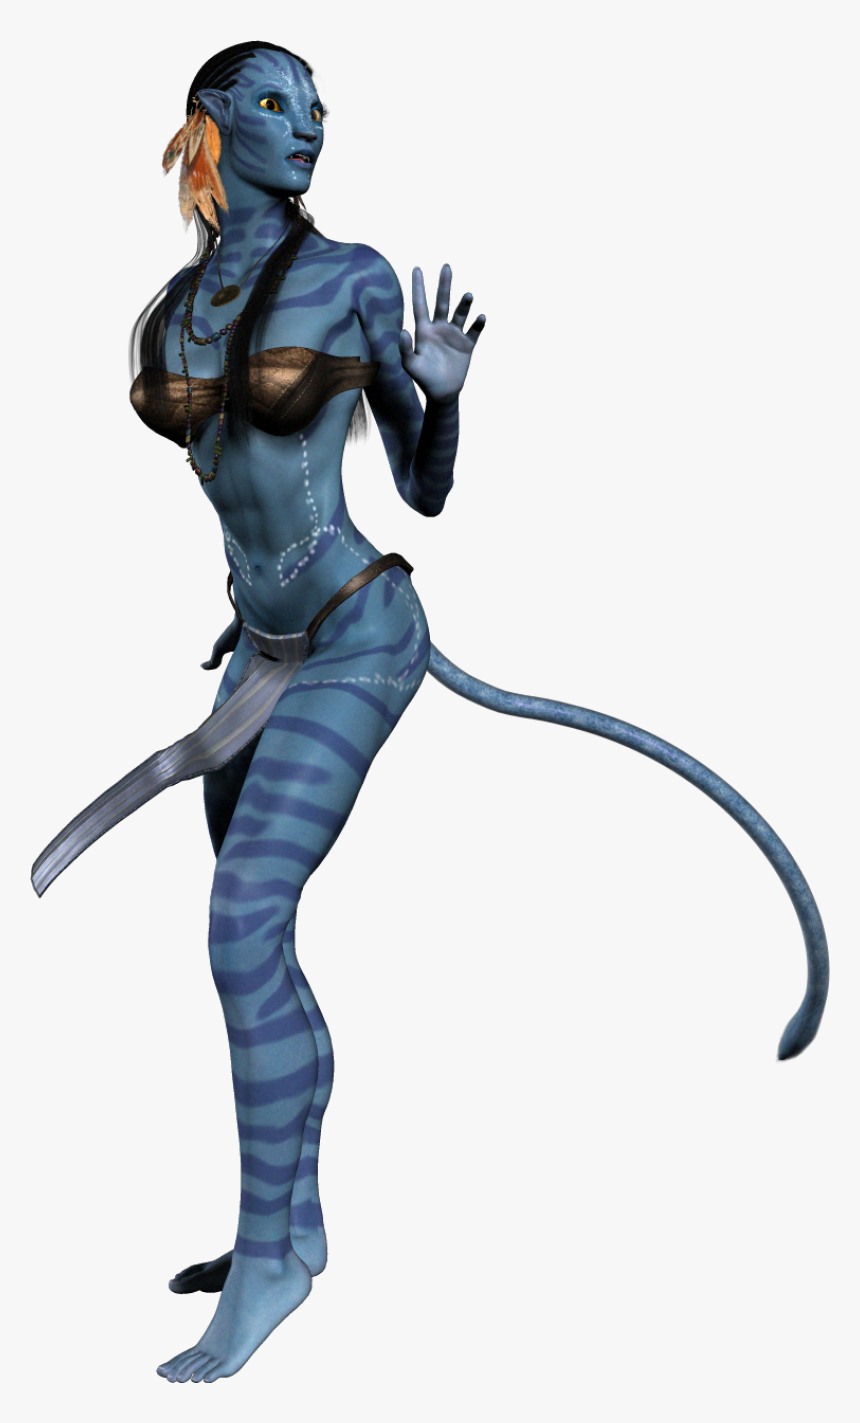 Avatar Neytiri Png Image - Avatar Movie Png, Transparent Png, Free Download